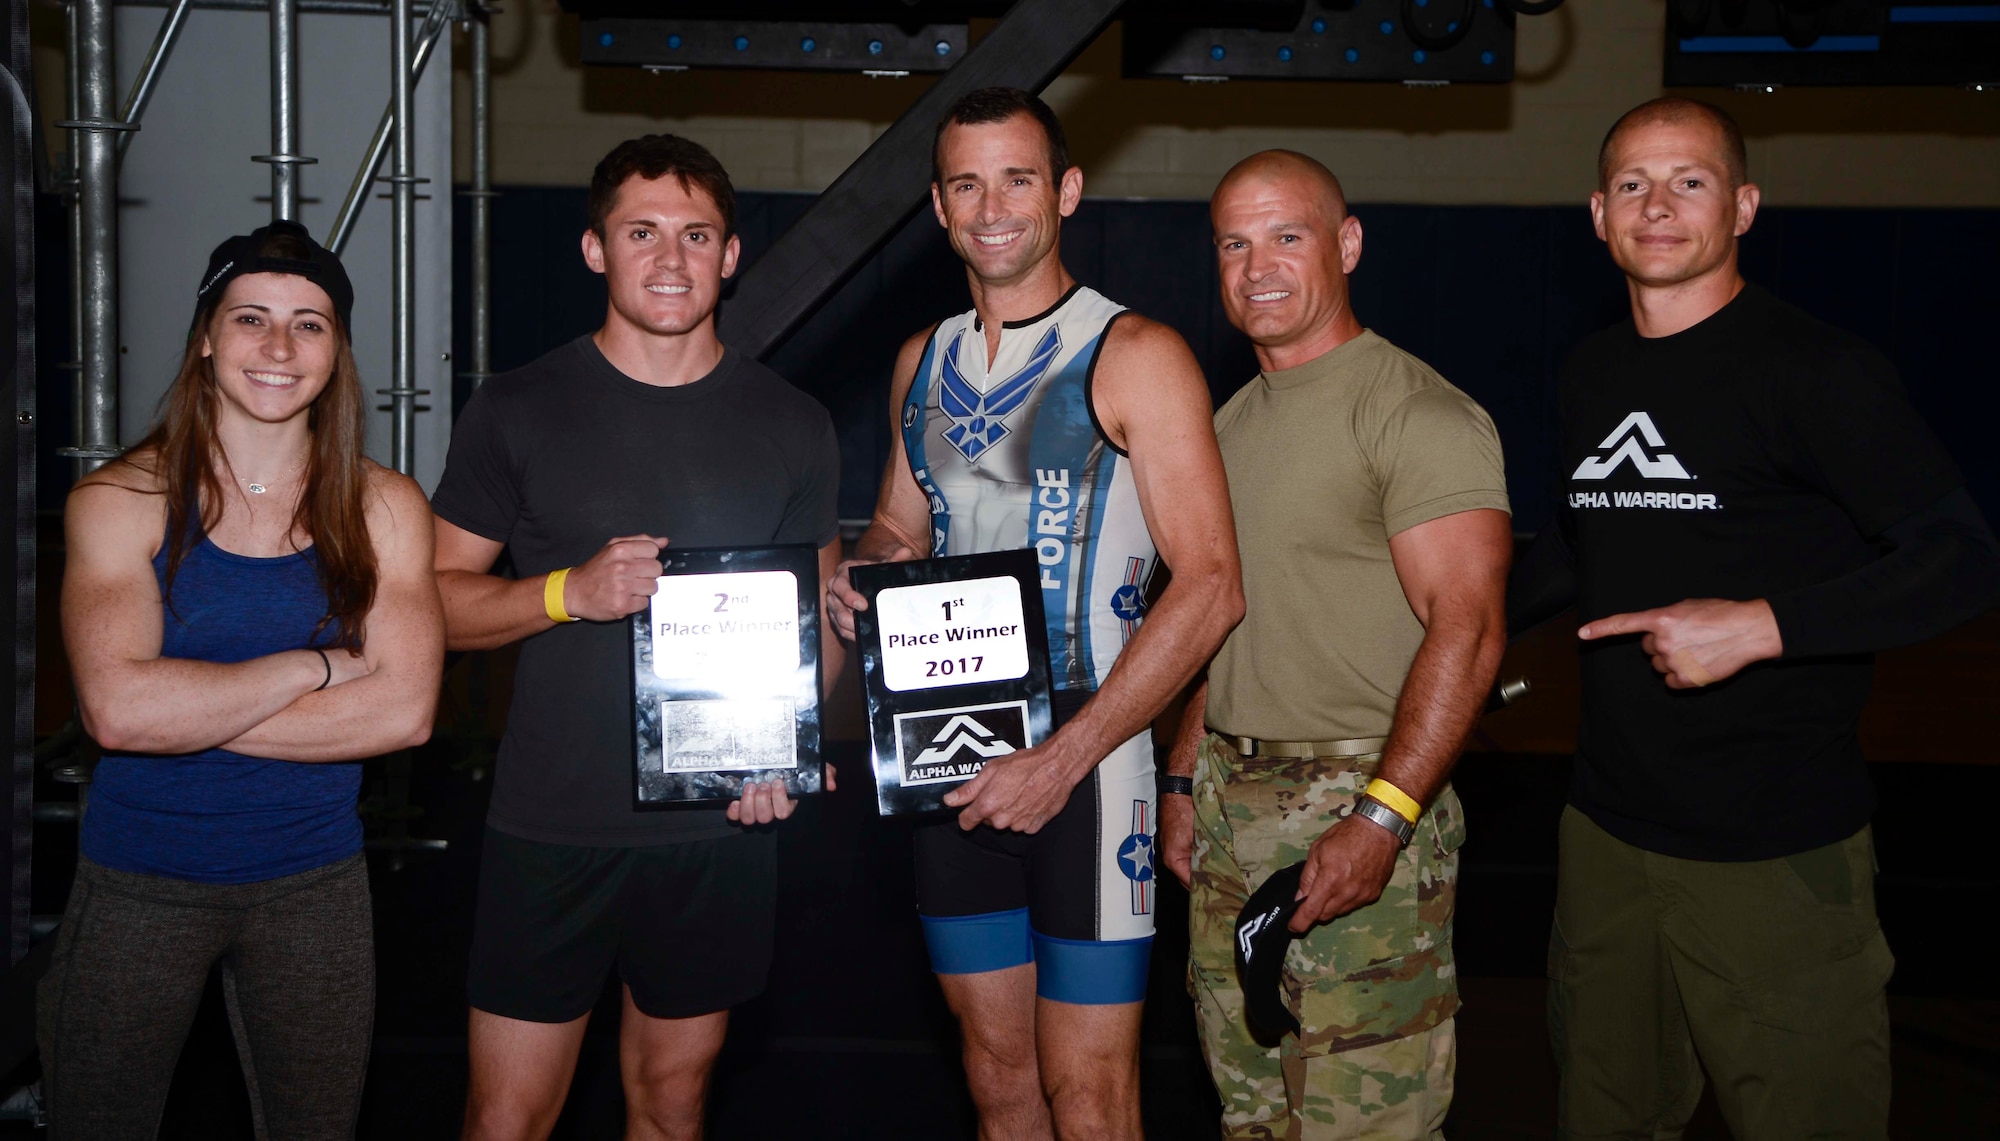 Barclay Stockett, far left, and Brent Steffensen, far right, both Alpha Warrior pros, pause for a photo with the top three winners of the Alpha Warrior Battle Rig competition at MacDill Air Force Base, Fla., April 19, 2017. Participants each received five minutes to successfully complete the obstacle course, and the top three fastest times were selected as winners. (U.S. Air Force photo by Staff Sgt. Vernon L. Fowler Jr.)